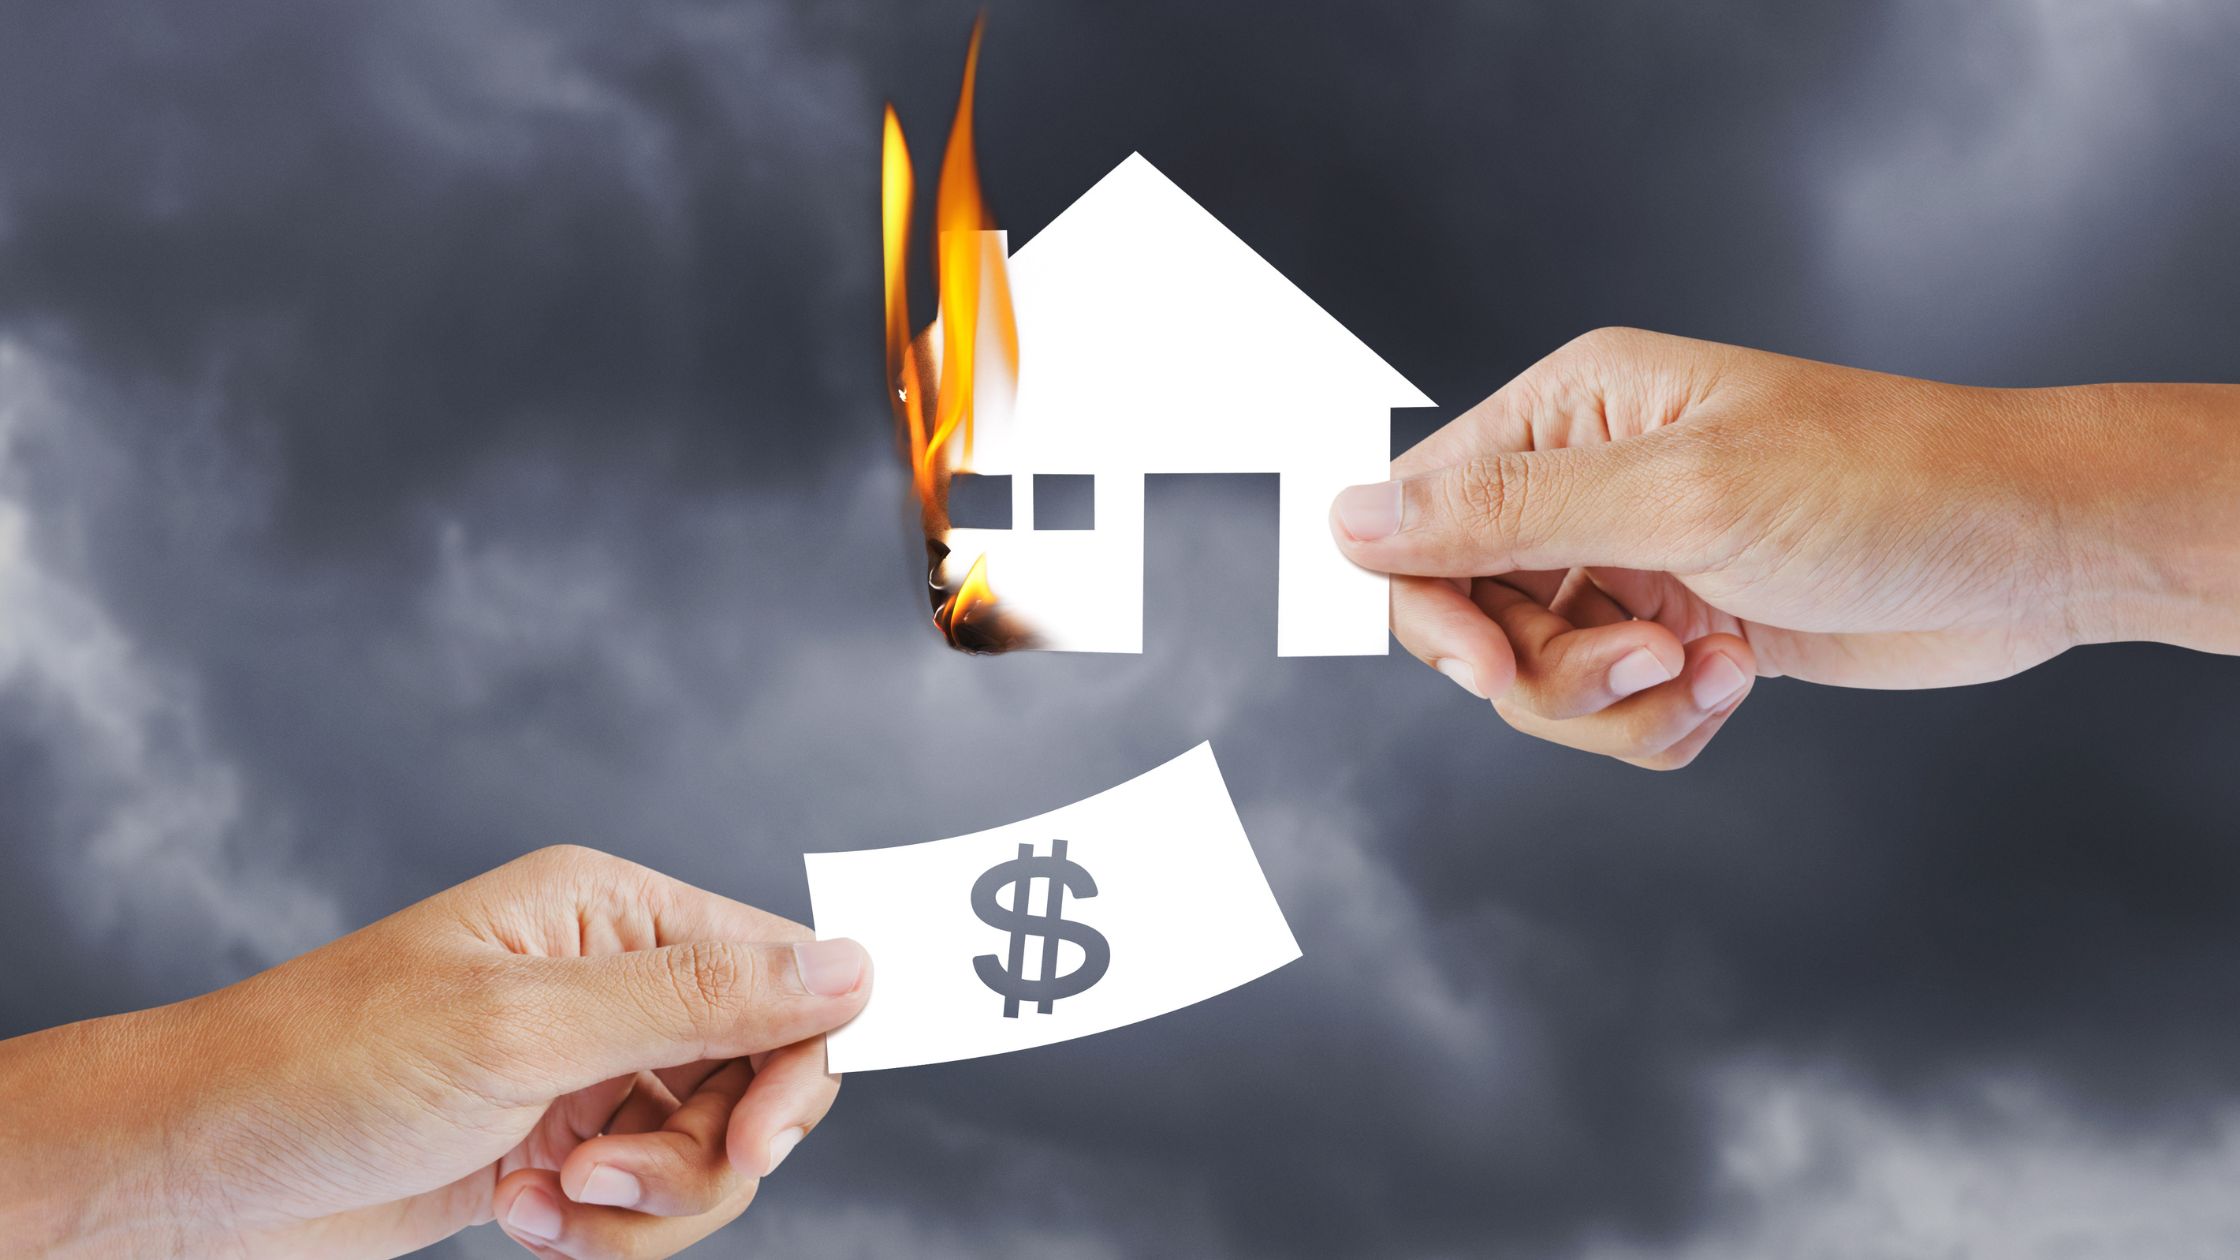 What is the Typical House Fire Insurance Payout?